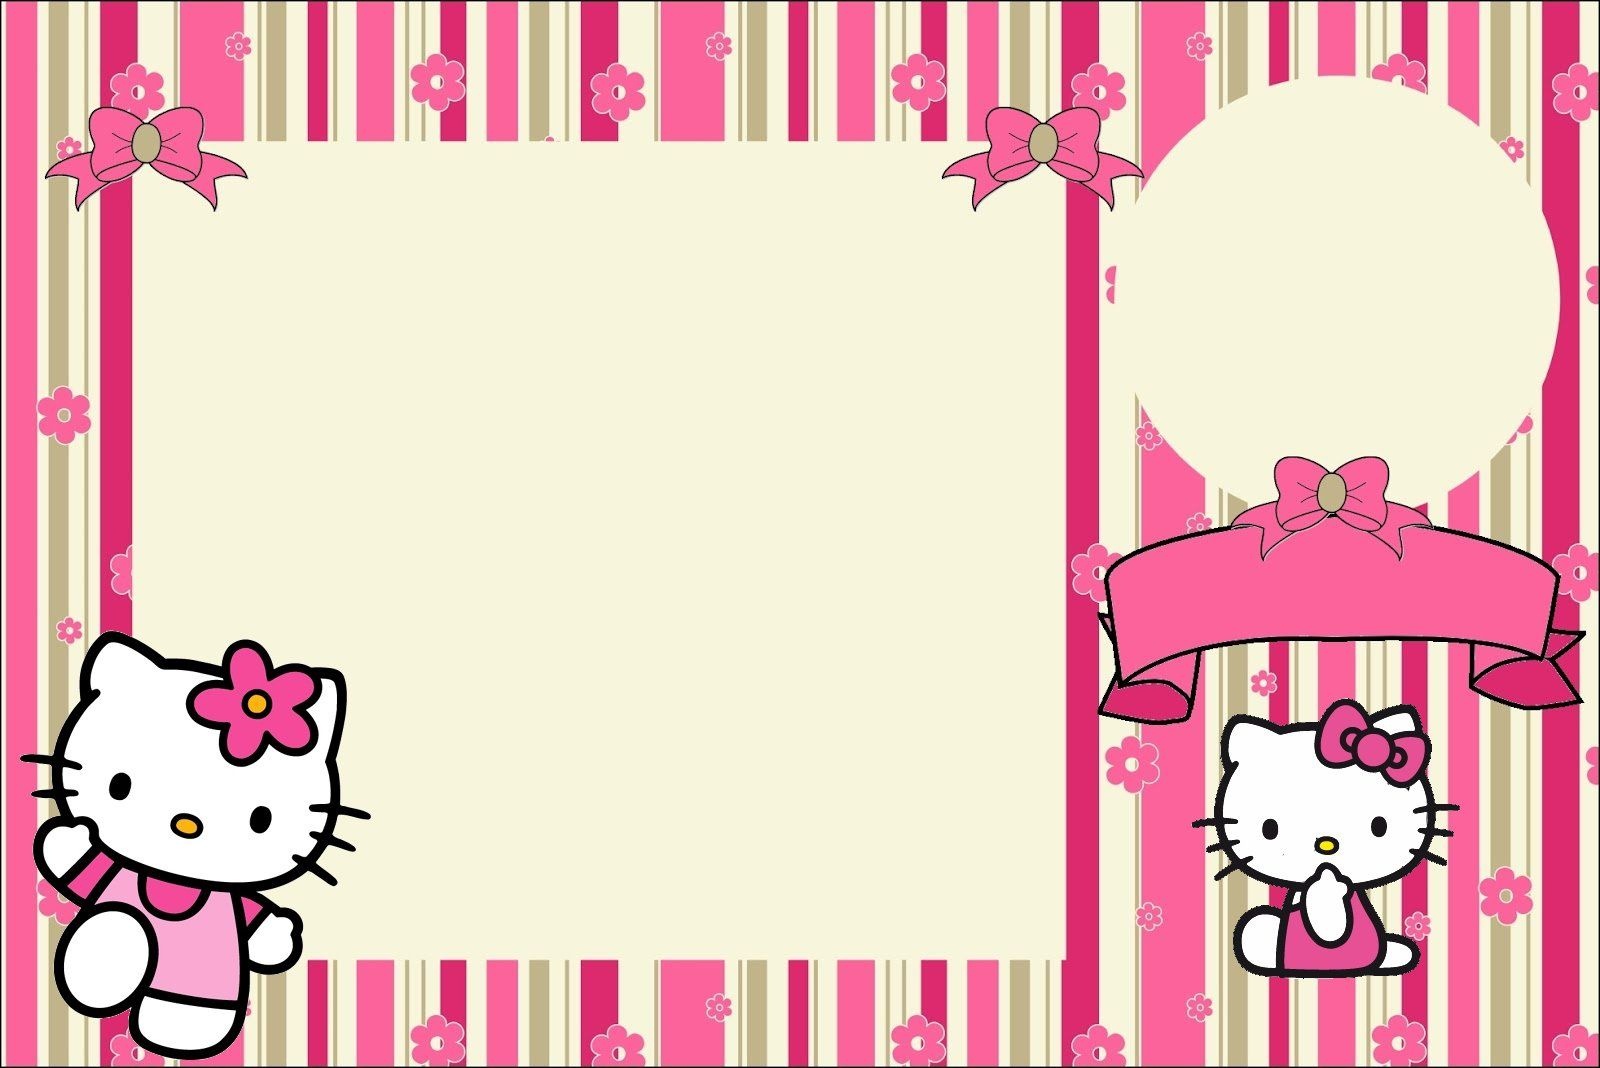 Hello Kitty With Flowers: Free Printable Invitations. | Hello Kitty - Hello Kitty Birthday Card Printable Free